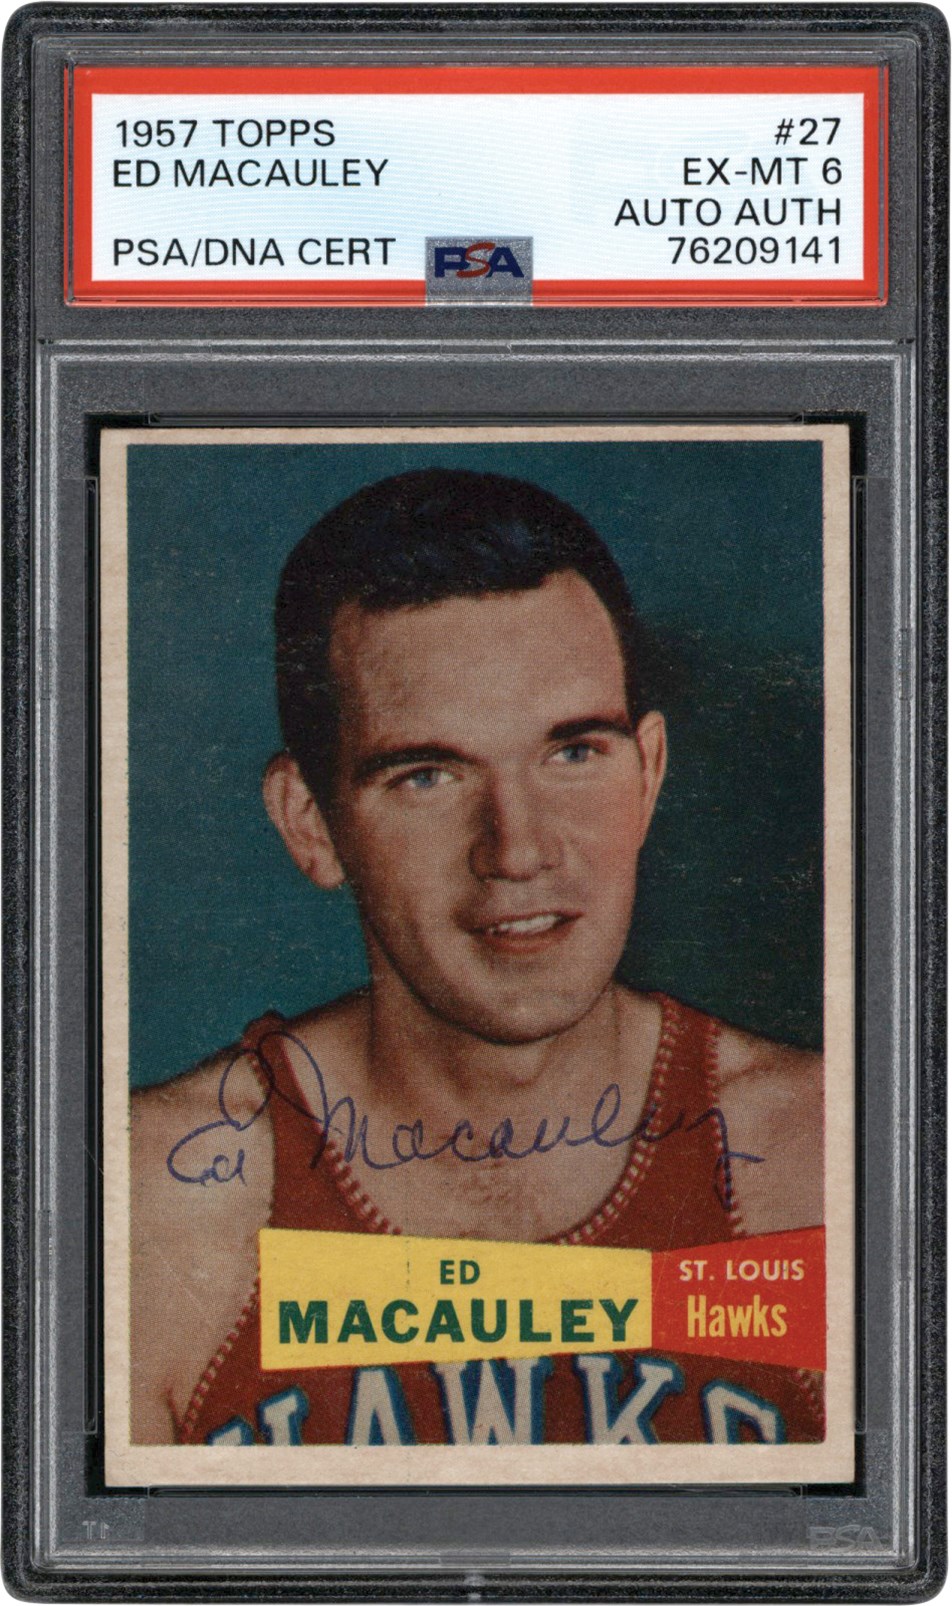 - 1957 Topps Basketball #27 Ed Macauley Signed Rookie Card PSA EX-MT 6 Auto Auth (Pop 1 of 2 - Highest Graded)